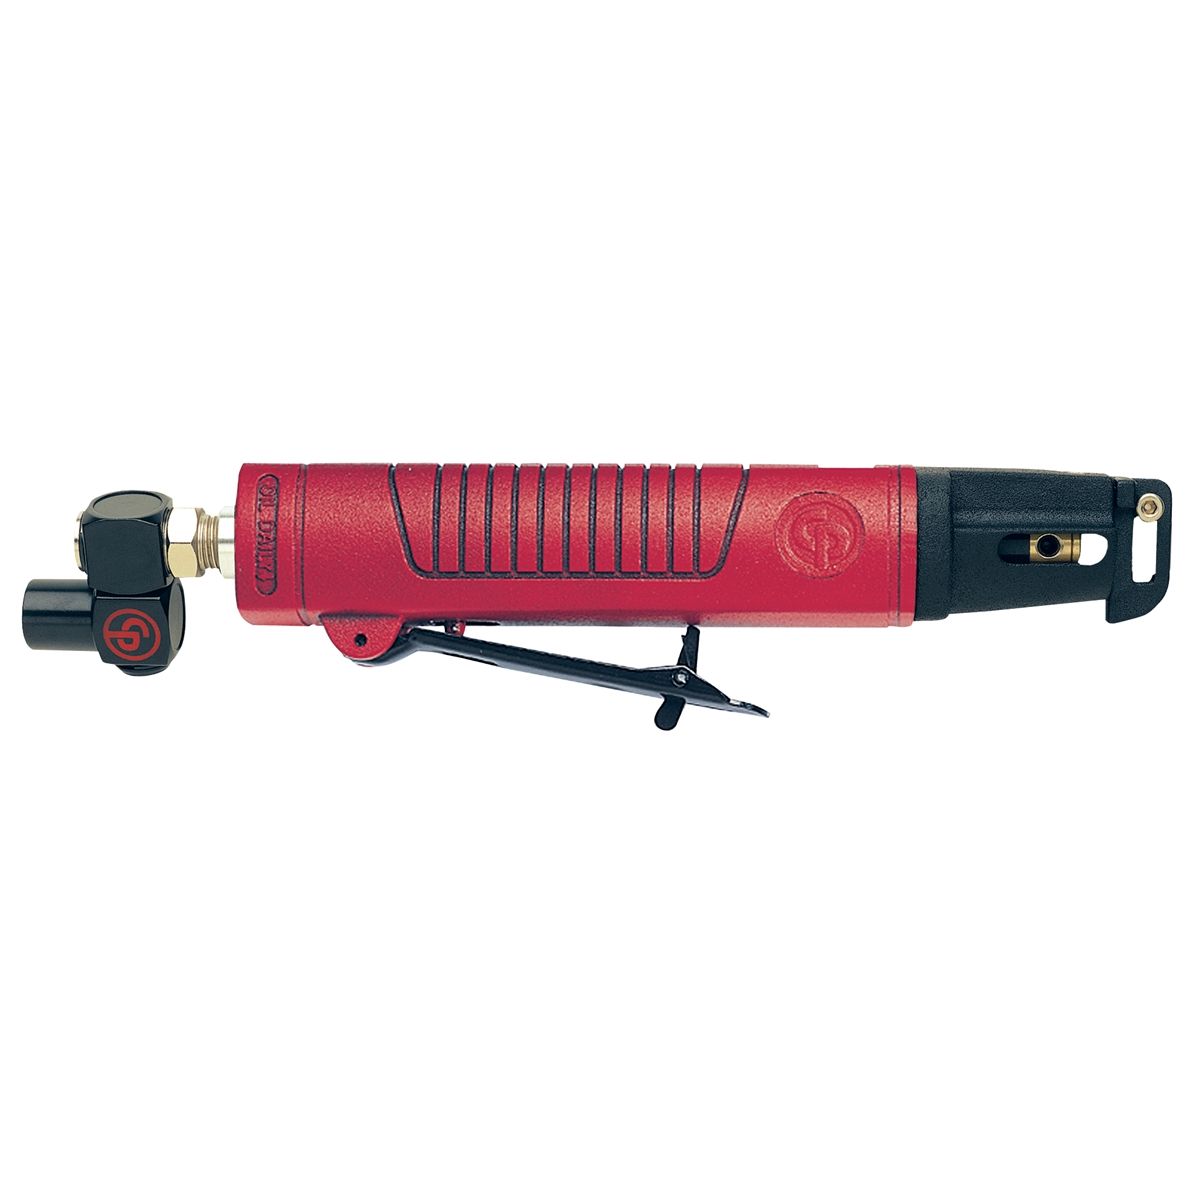 Chicago Pneumatic 7901K Low Vibration Reciprocating Saw Kit with Blades and Case